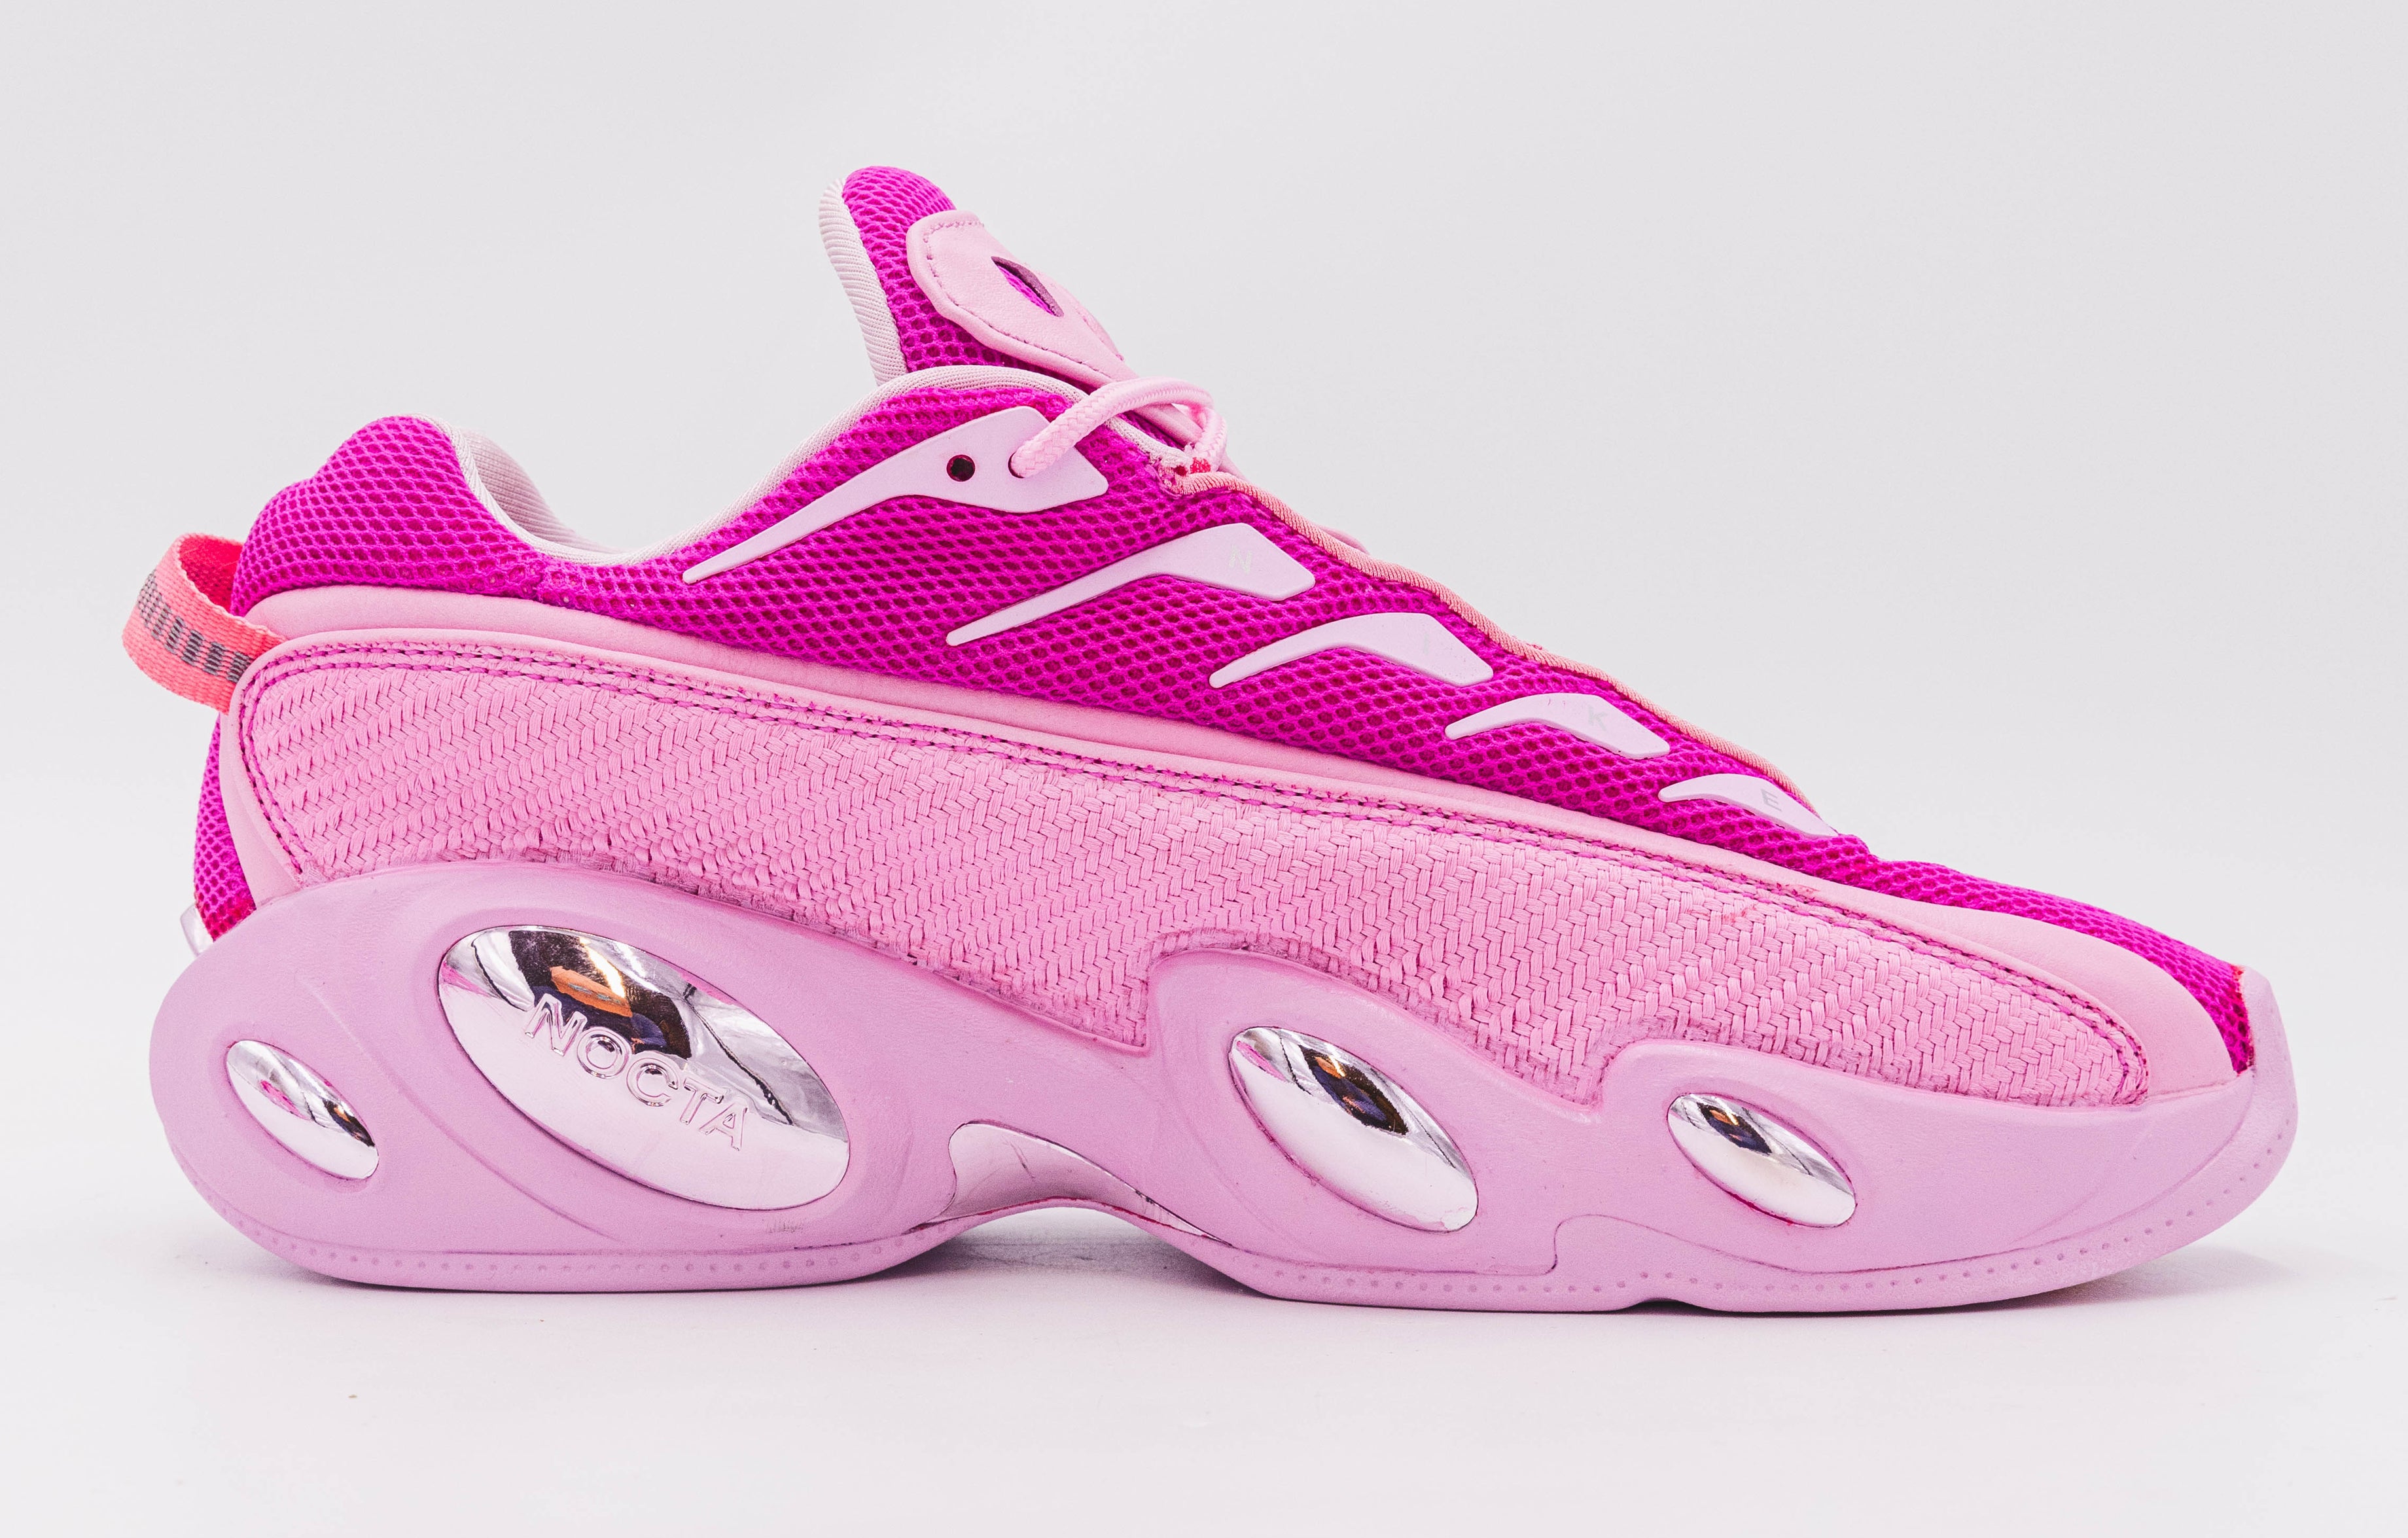 Drake x Nike NOCTA Glide Pink by The Surgeon Medial